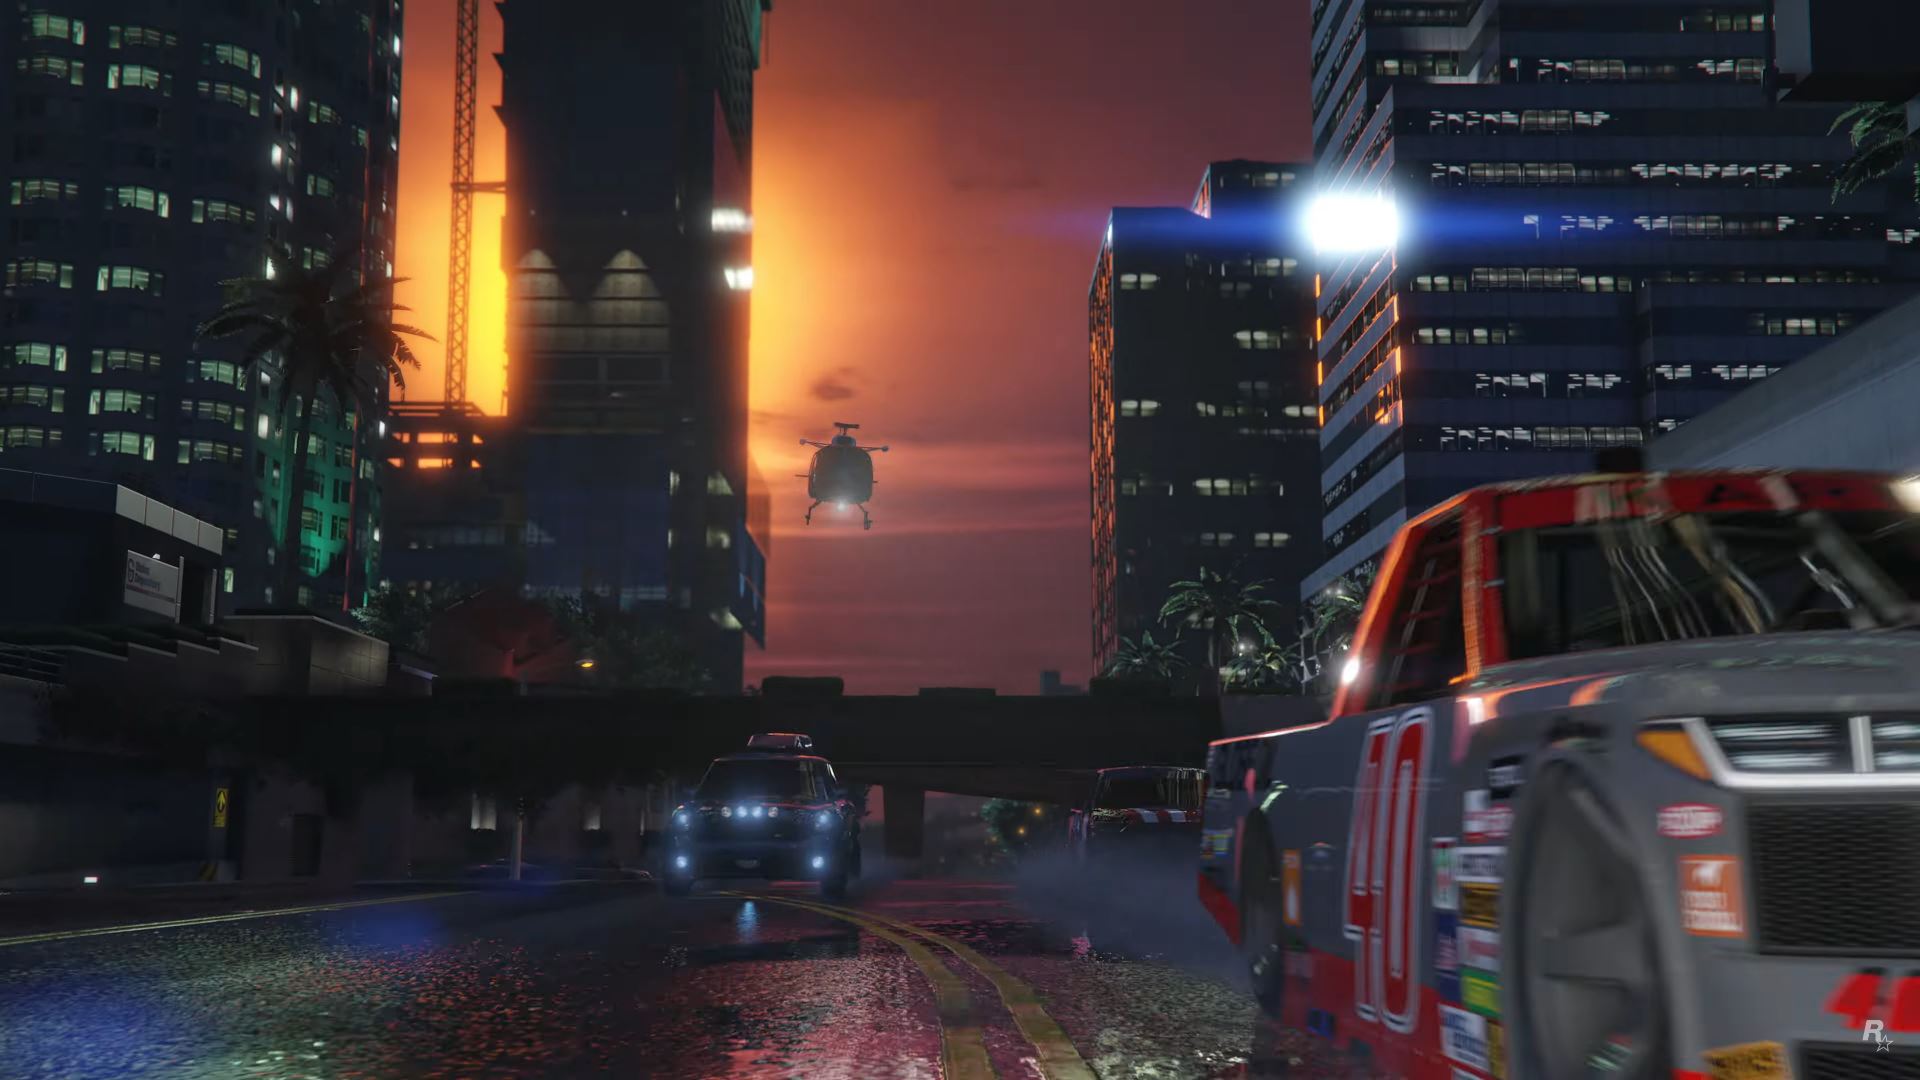 How to download the GTA Online Los Santos Drug Wars update on PC,  PlayStation, and Xbox